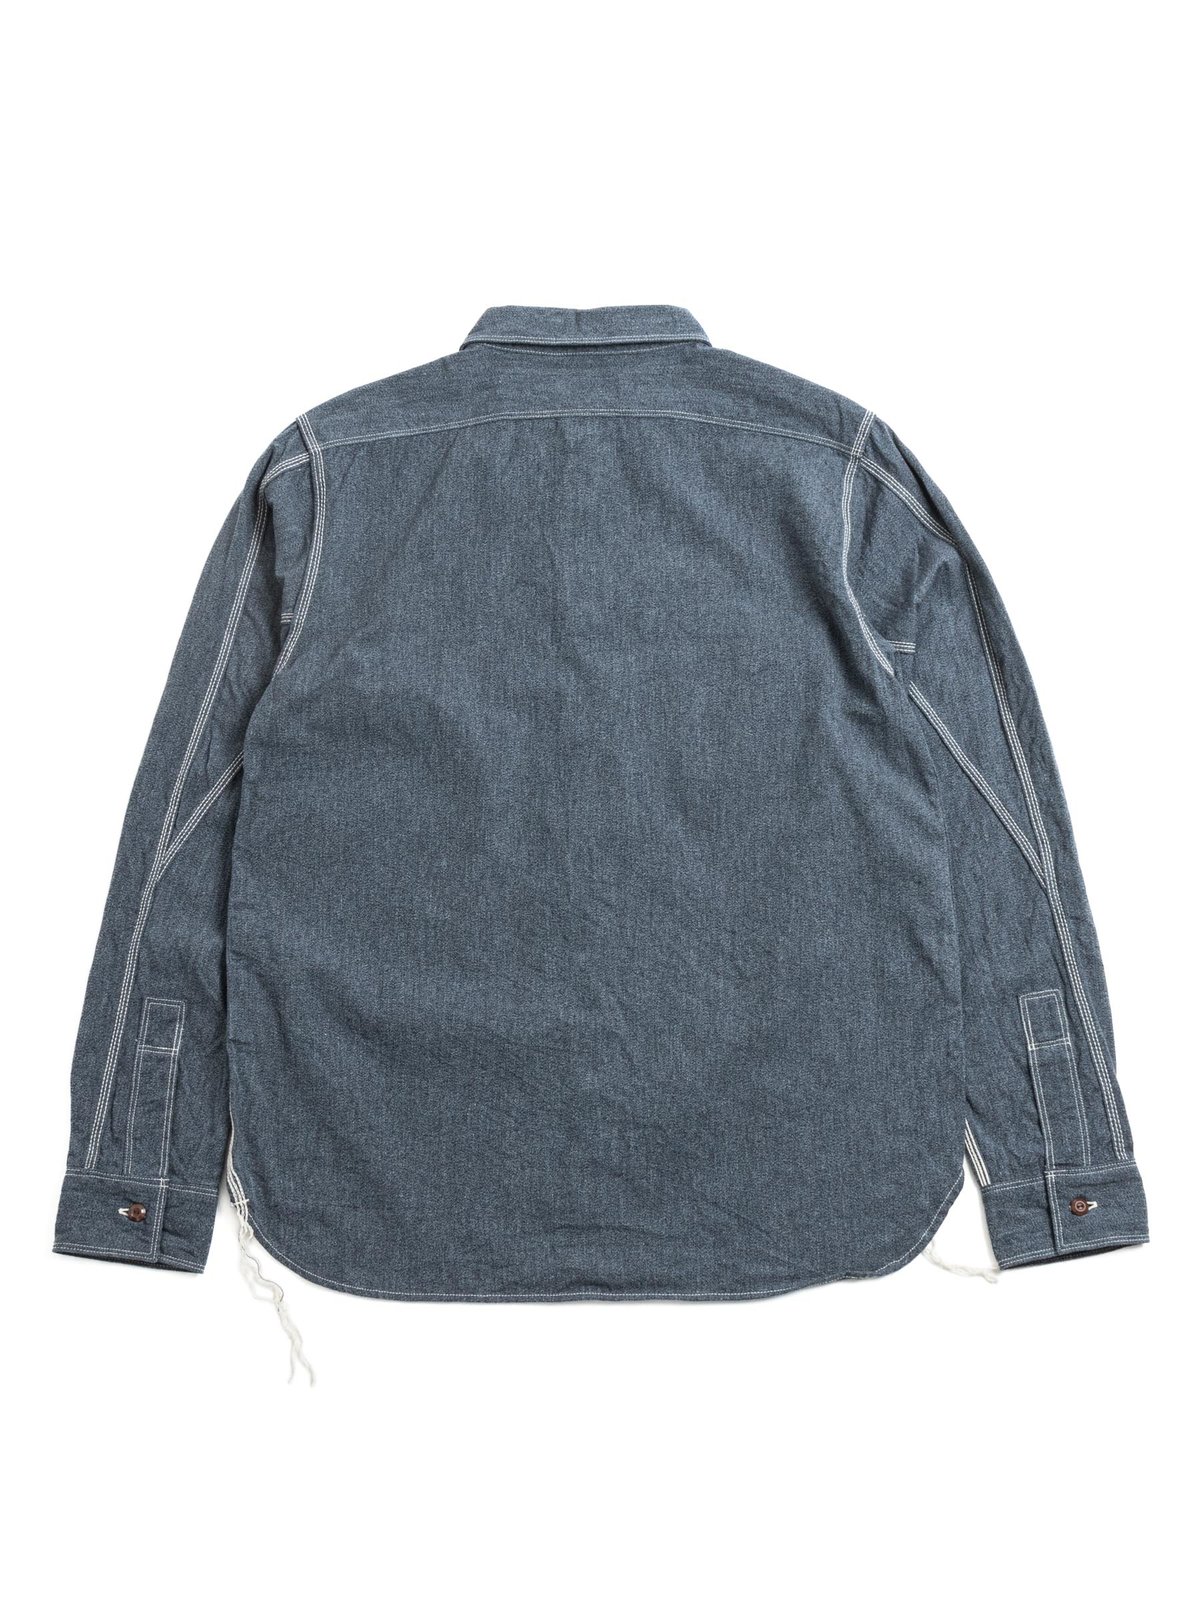 SJCBS23 TWISTED HEATHER SELVEDGE CHAMBRAY NAVY - Image 6